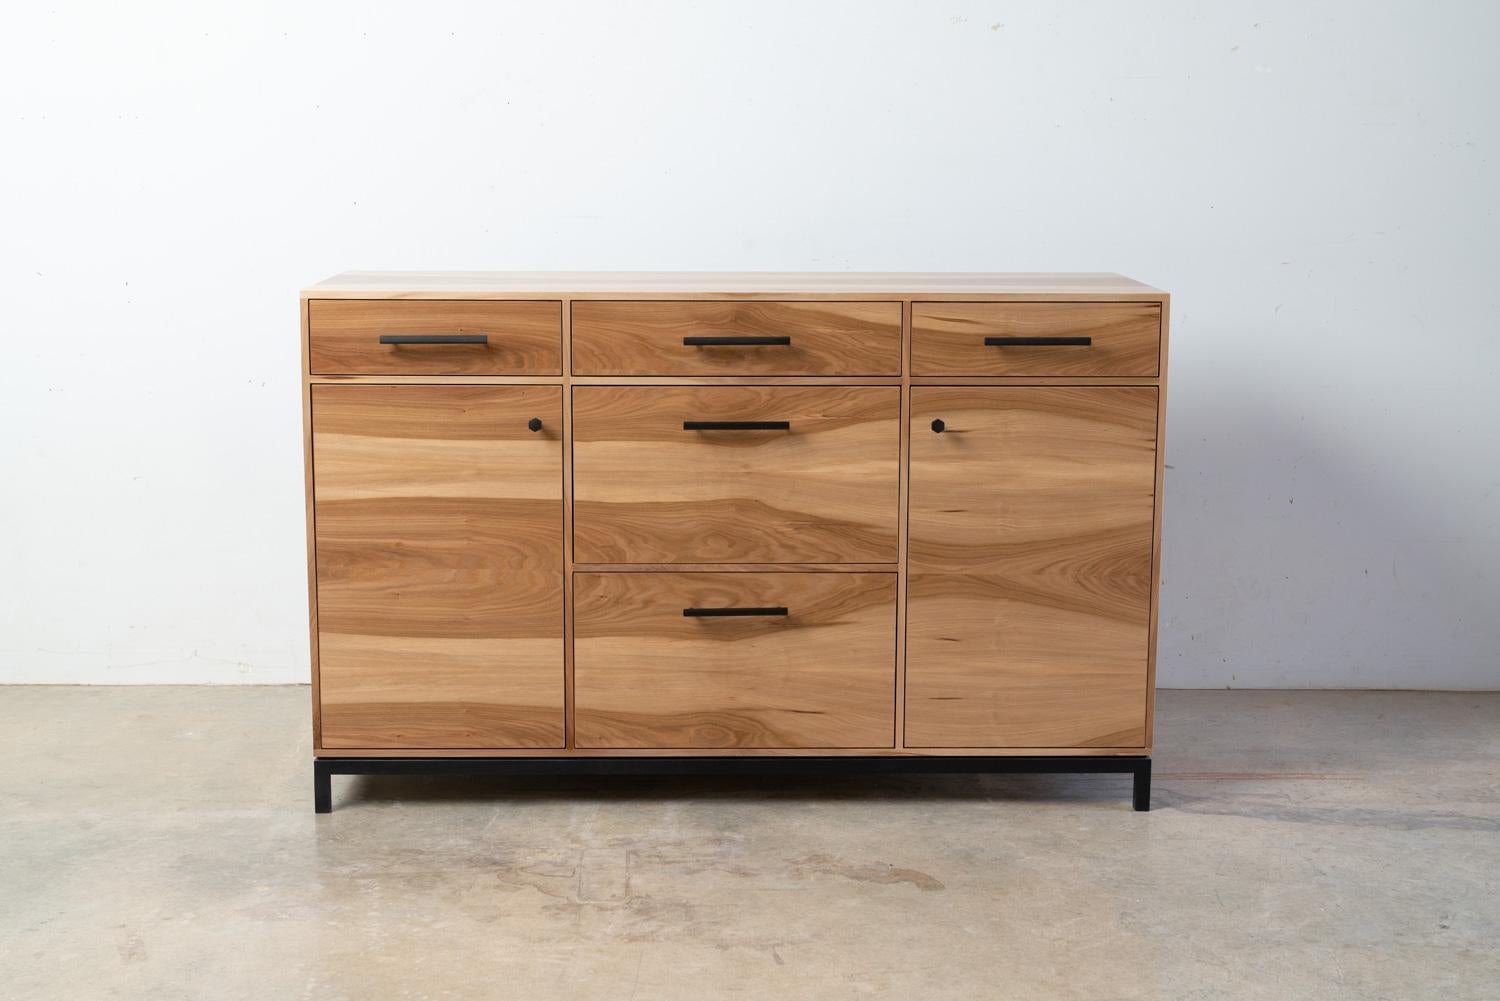 The Lanett credenza is a Modern Credenza in Sweet Gum (Satin Walnut) with Black Patina Steel Base. It is handcrafted and unique in every way. The elegance of this modern style credenza strikes from the first moment with intricate veneer work